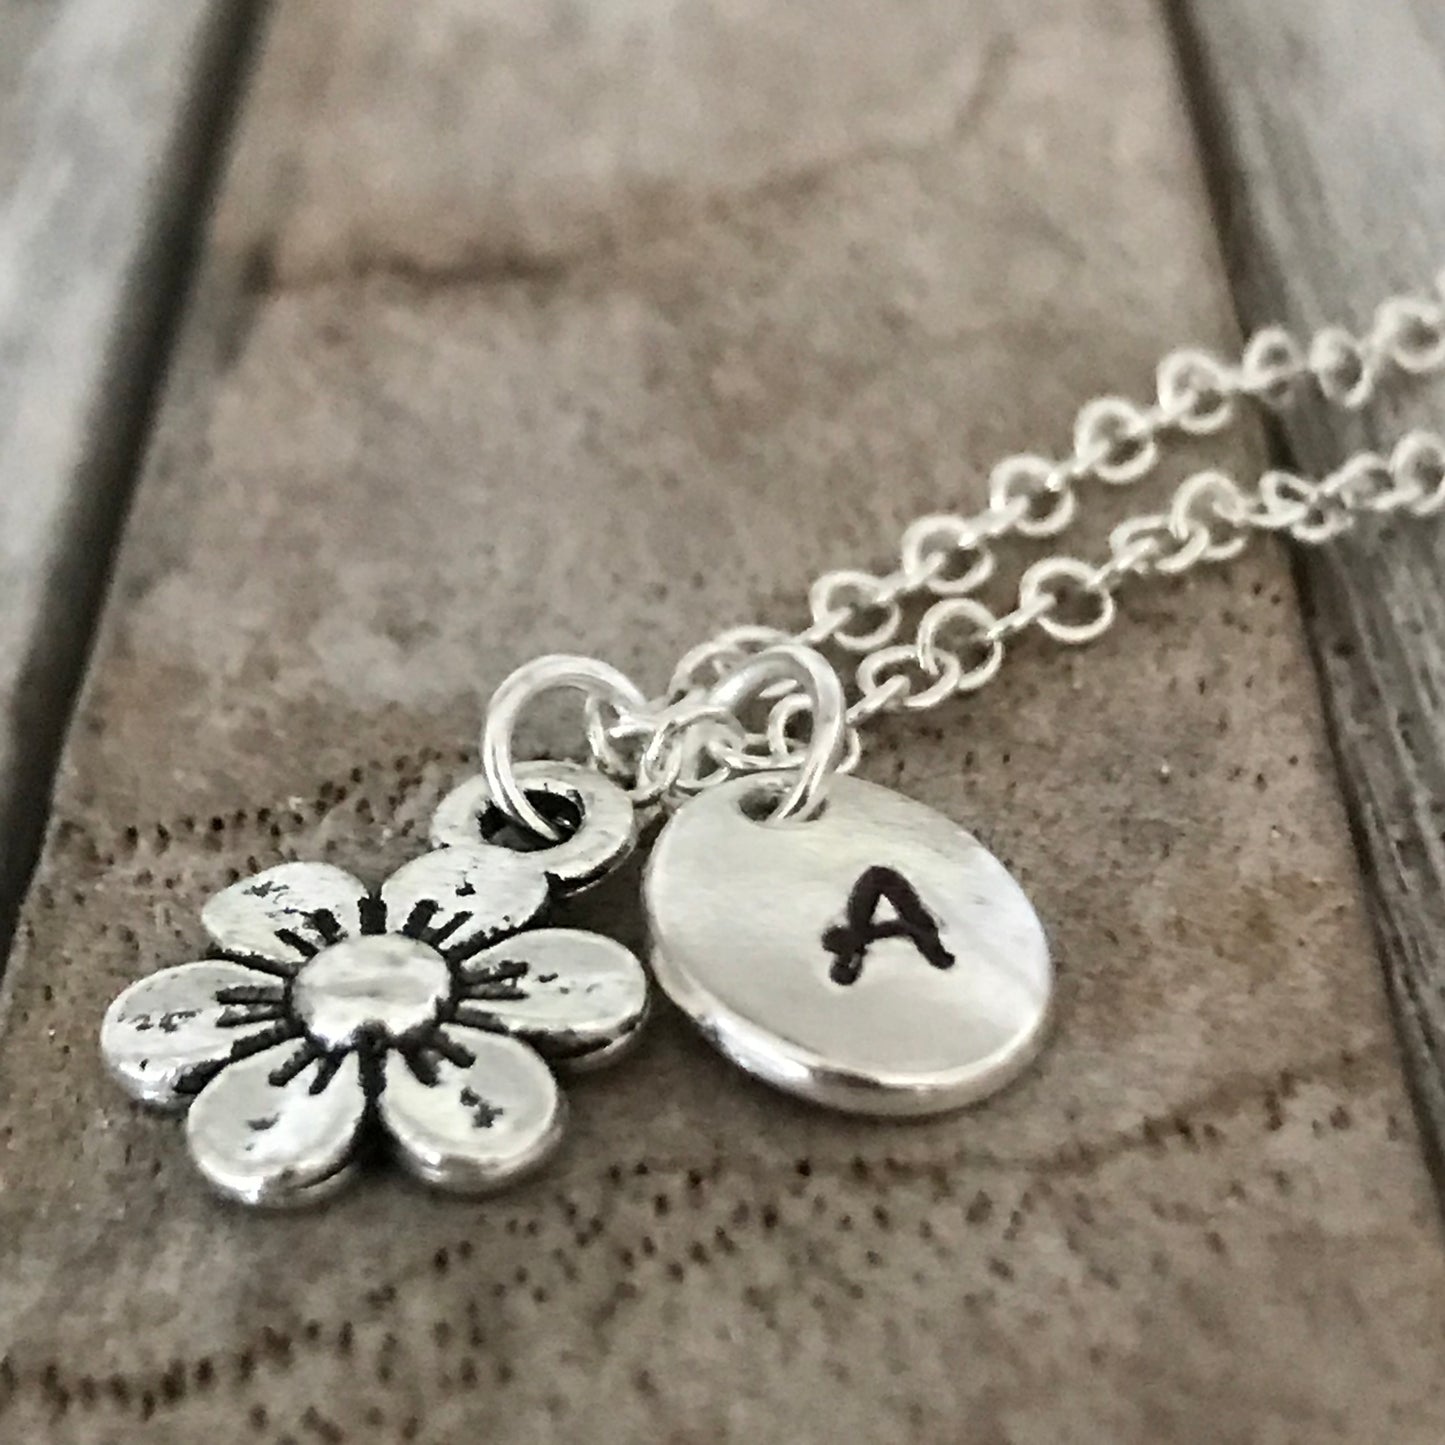 Personalised flower necklace, Personalized gift, Flower girl necklace with monogram necklace